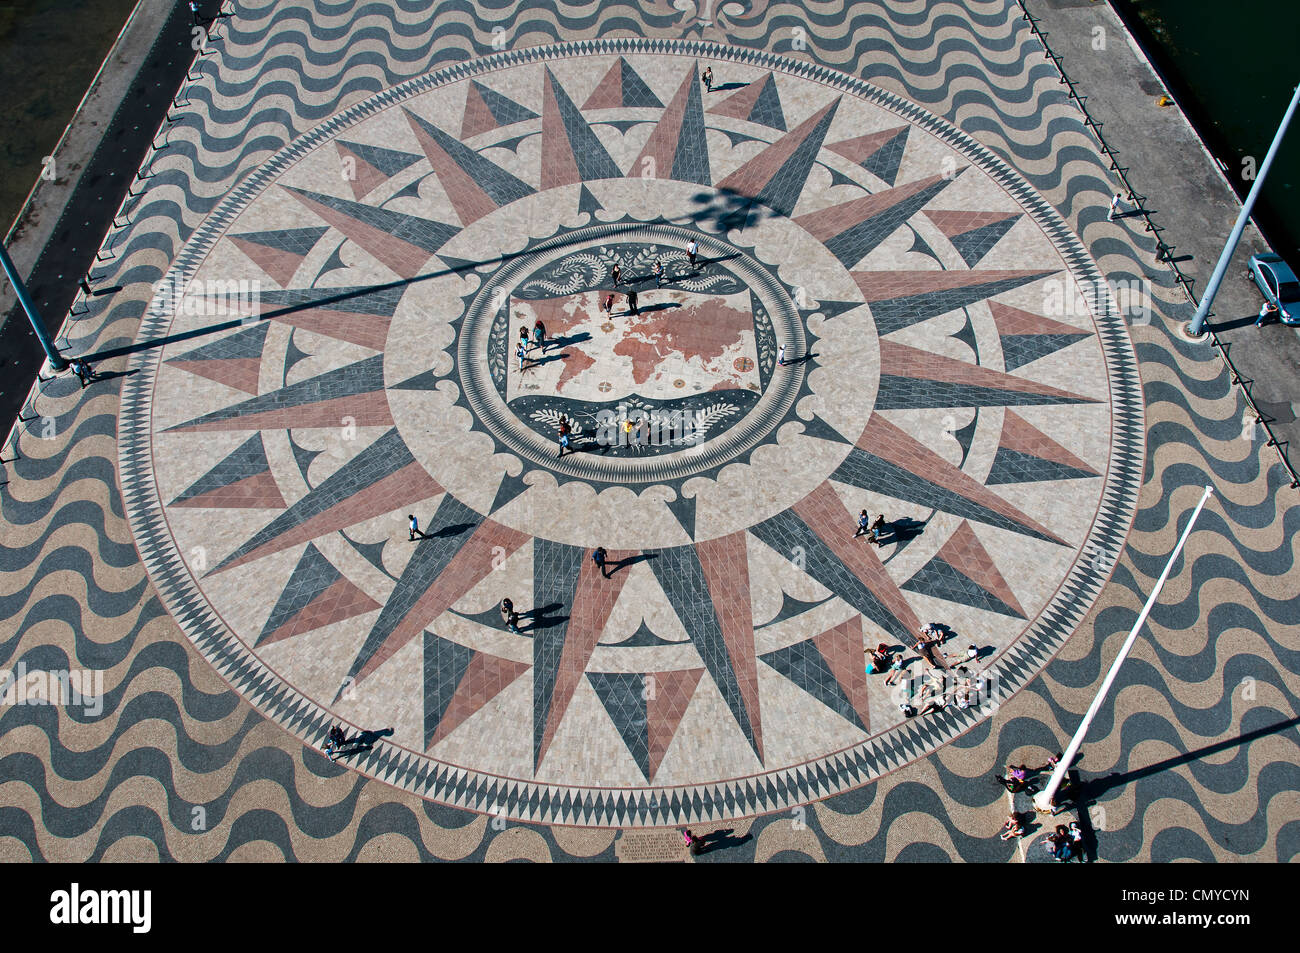 The compass rose and mappa mundi as seen from the top of Monument to the Discoveries, Belém, Lisbon, Portugal Stock Photo